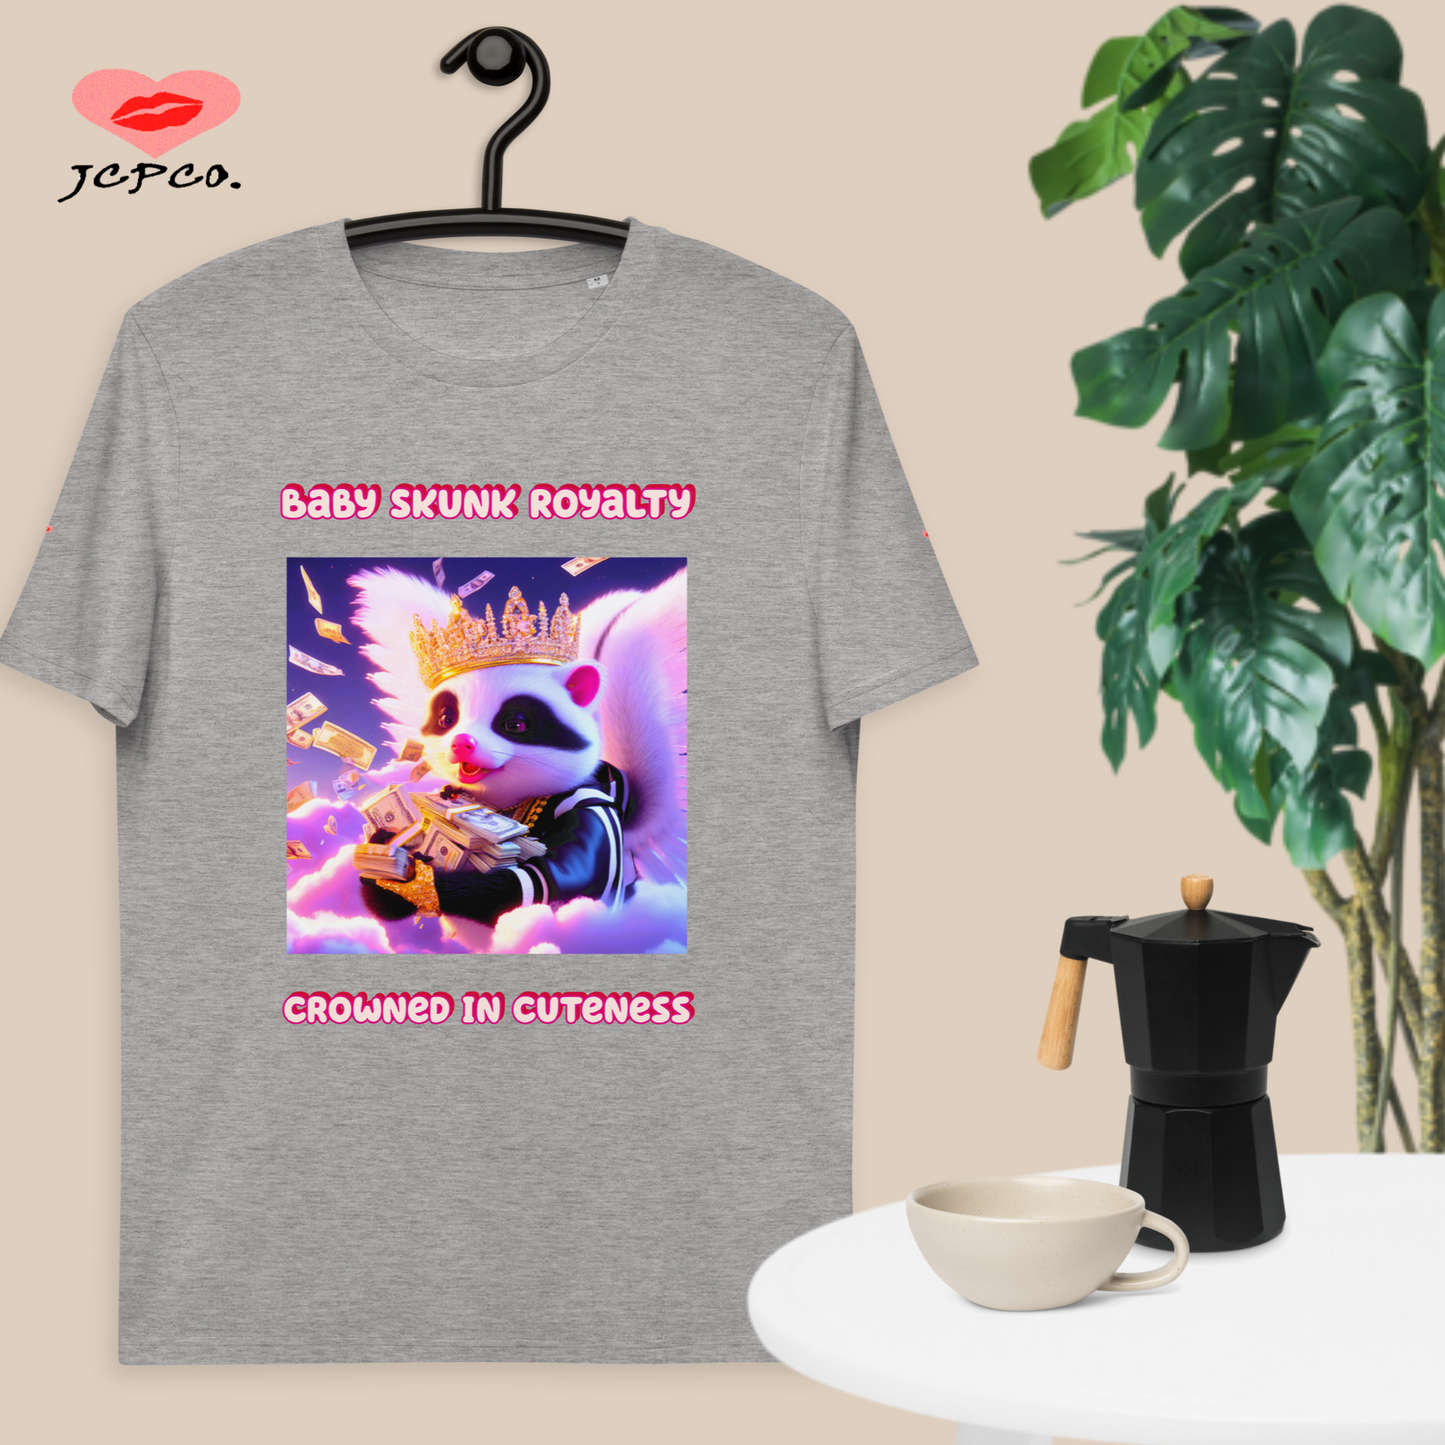 👑🦨Baby Skunk Royalty Skunk Swag Crowned in Cuteness💎Unisex organic cotton t-shirt👕